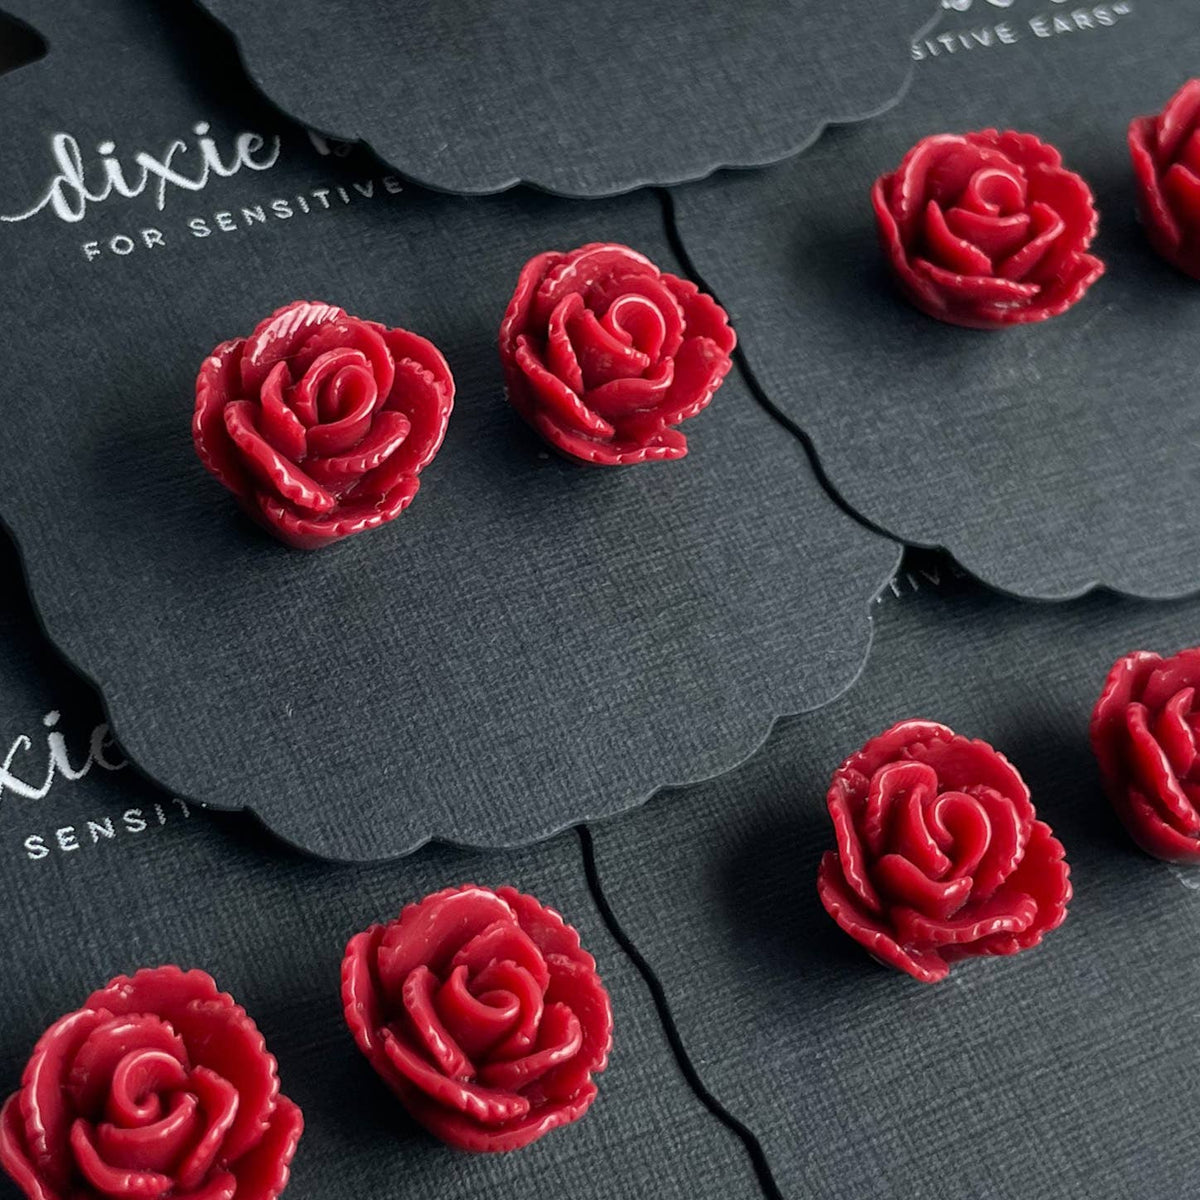 Haute Red Roses - Premium Earrings from Dixie Bliss - Just $12! Shop now at Ida Louise Boutique